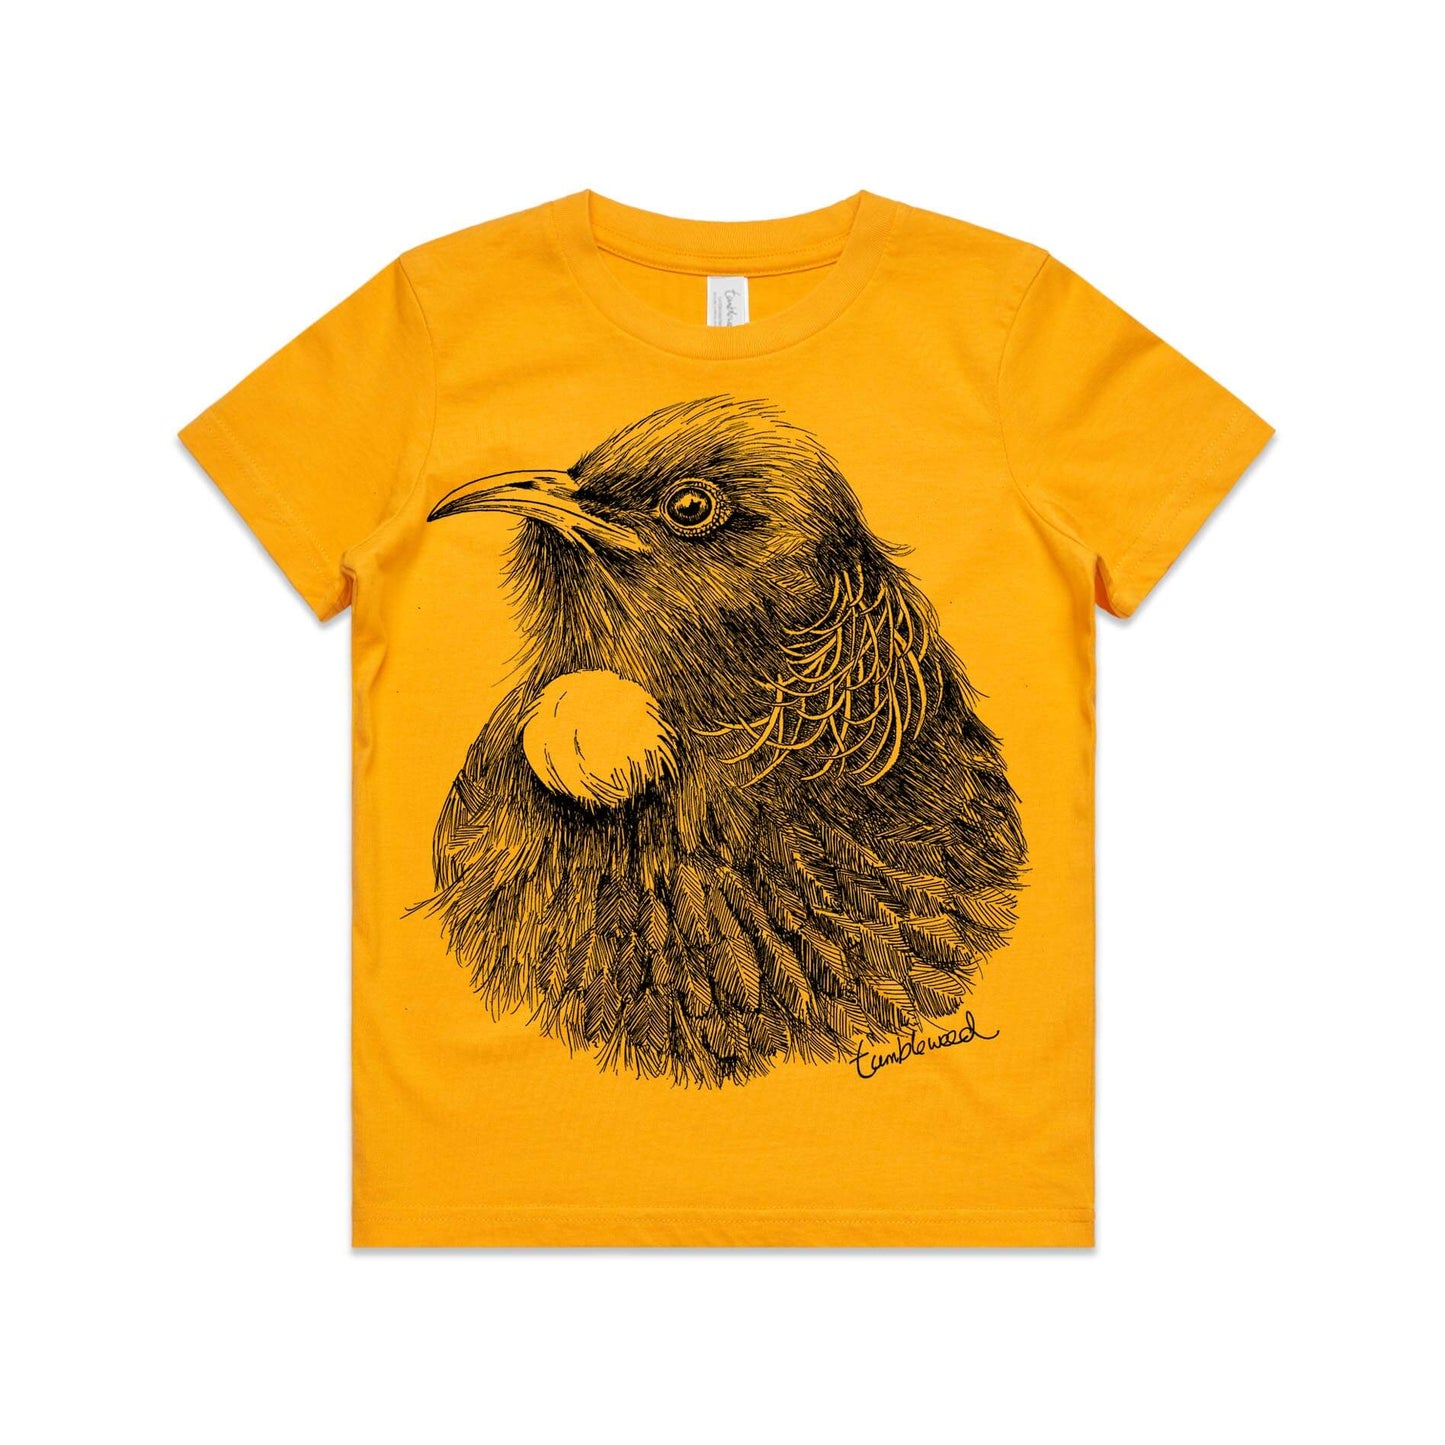 Gold, cotton kids' t-shirt with screen printed tui design.